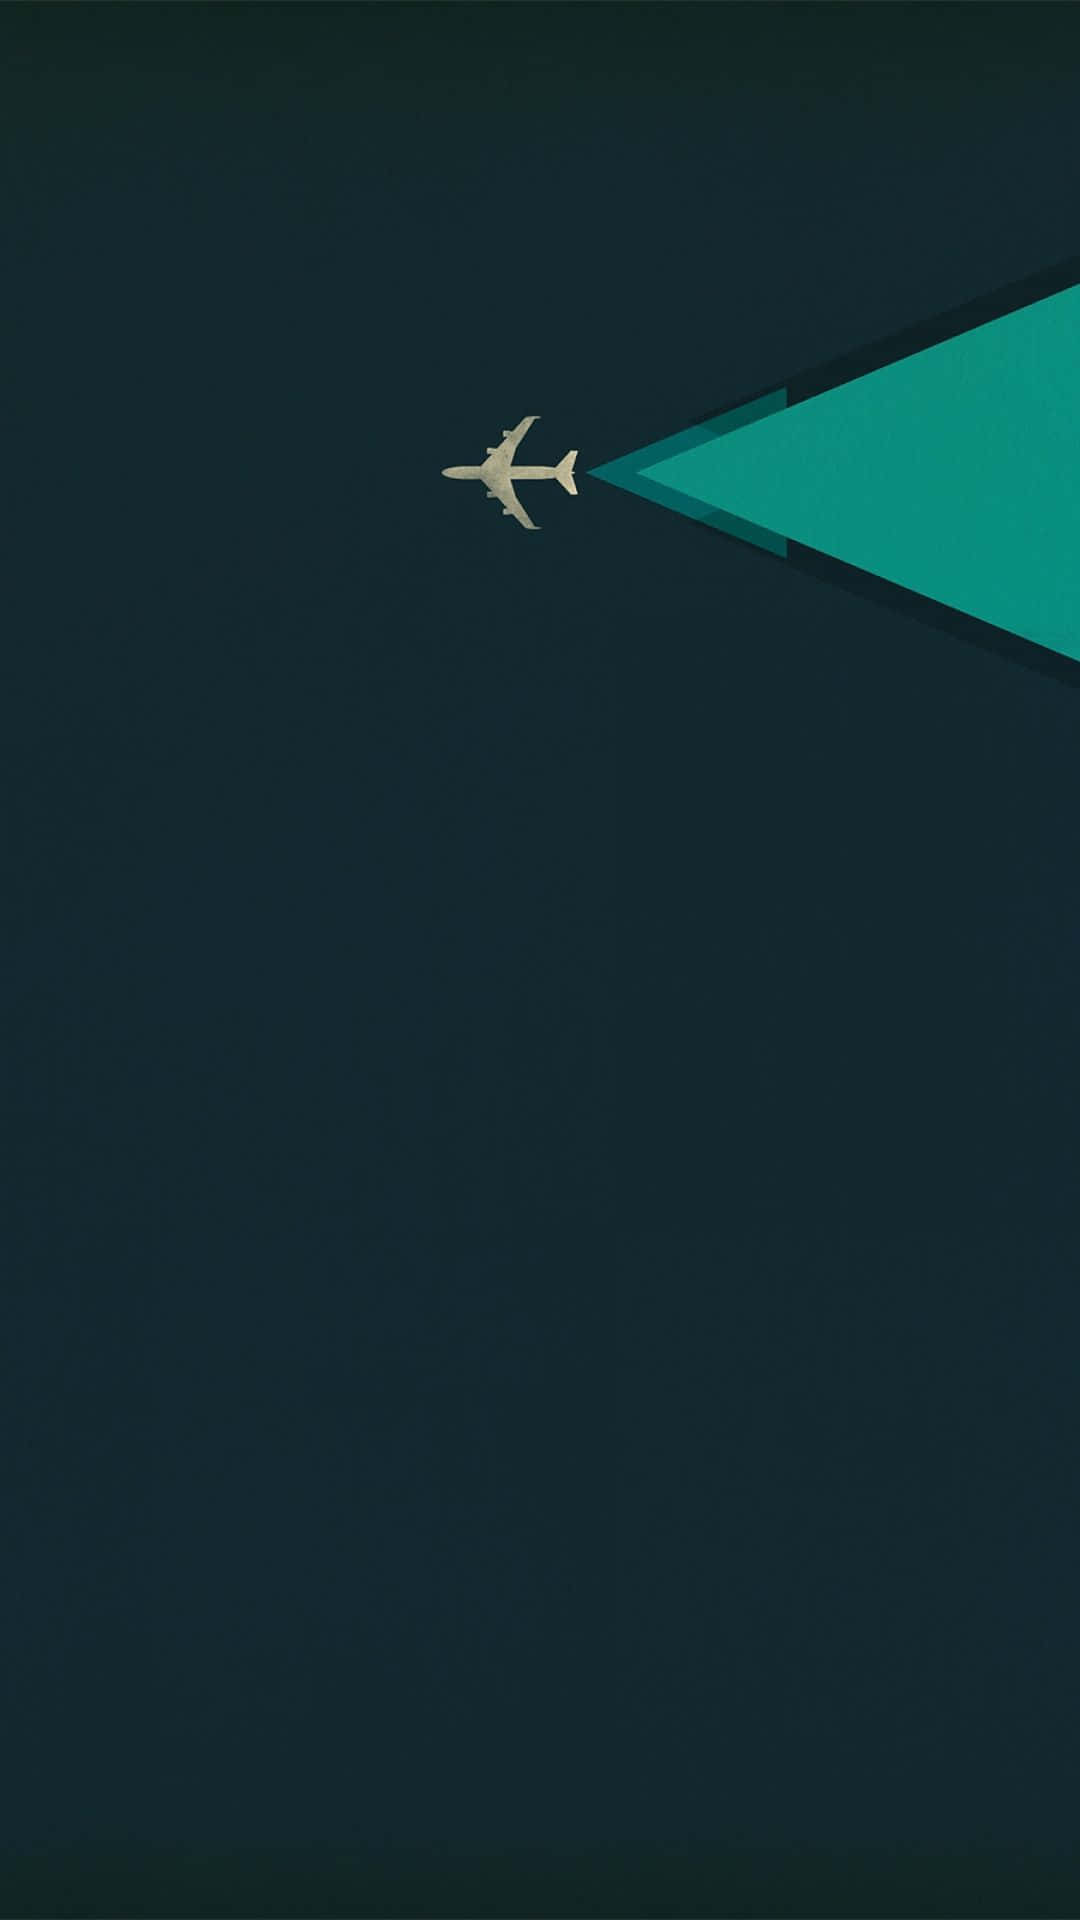 Flying Airplane Minimalist Iphone Picture